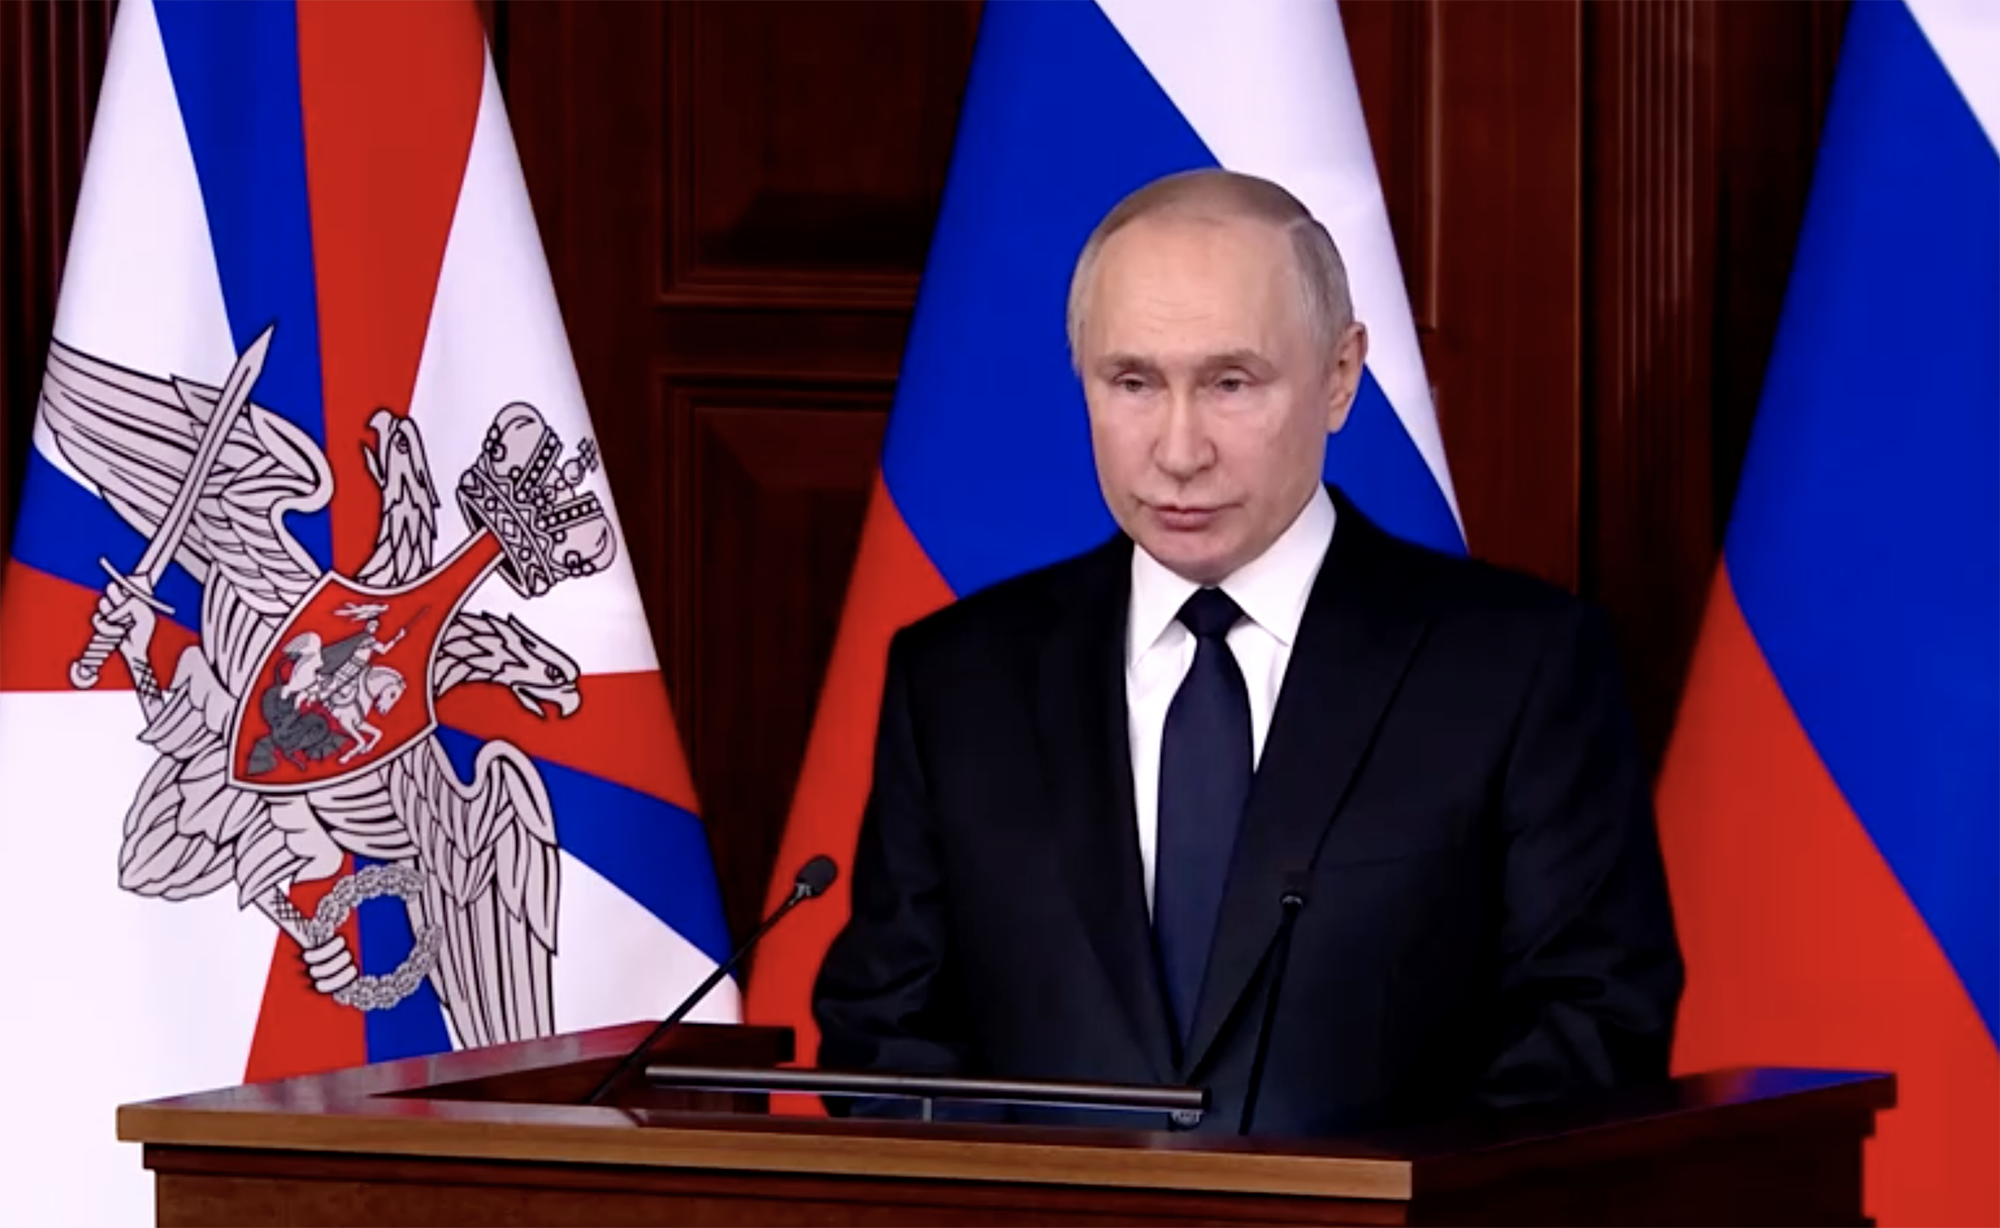 "War in Ukraine was inevitable, it's better today than tomorrow " - President Putin claims